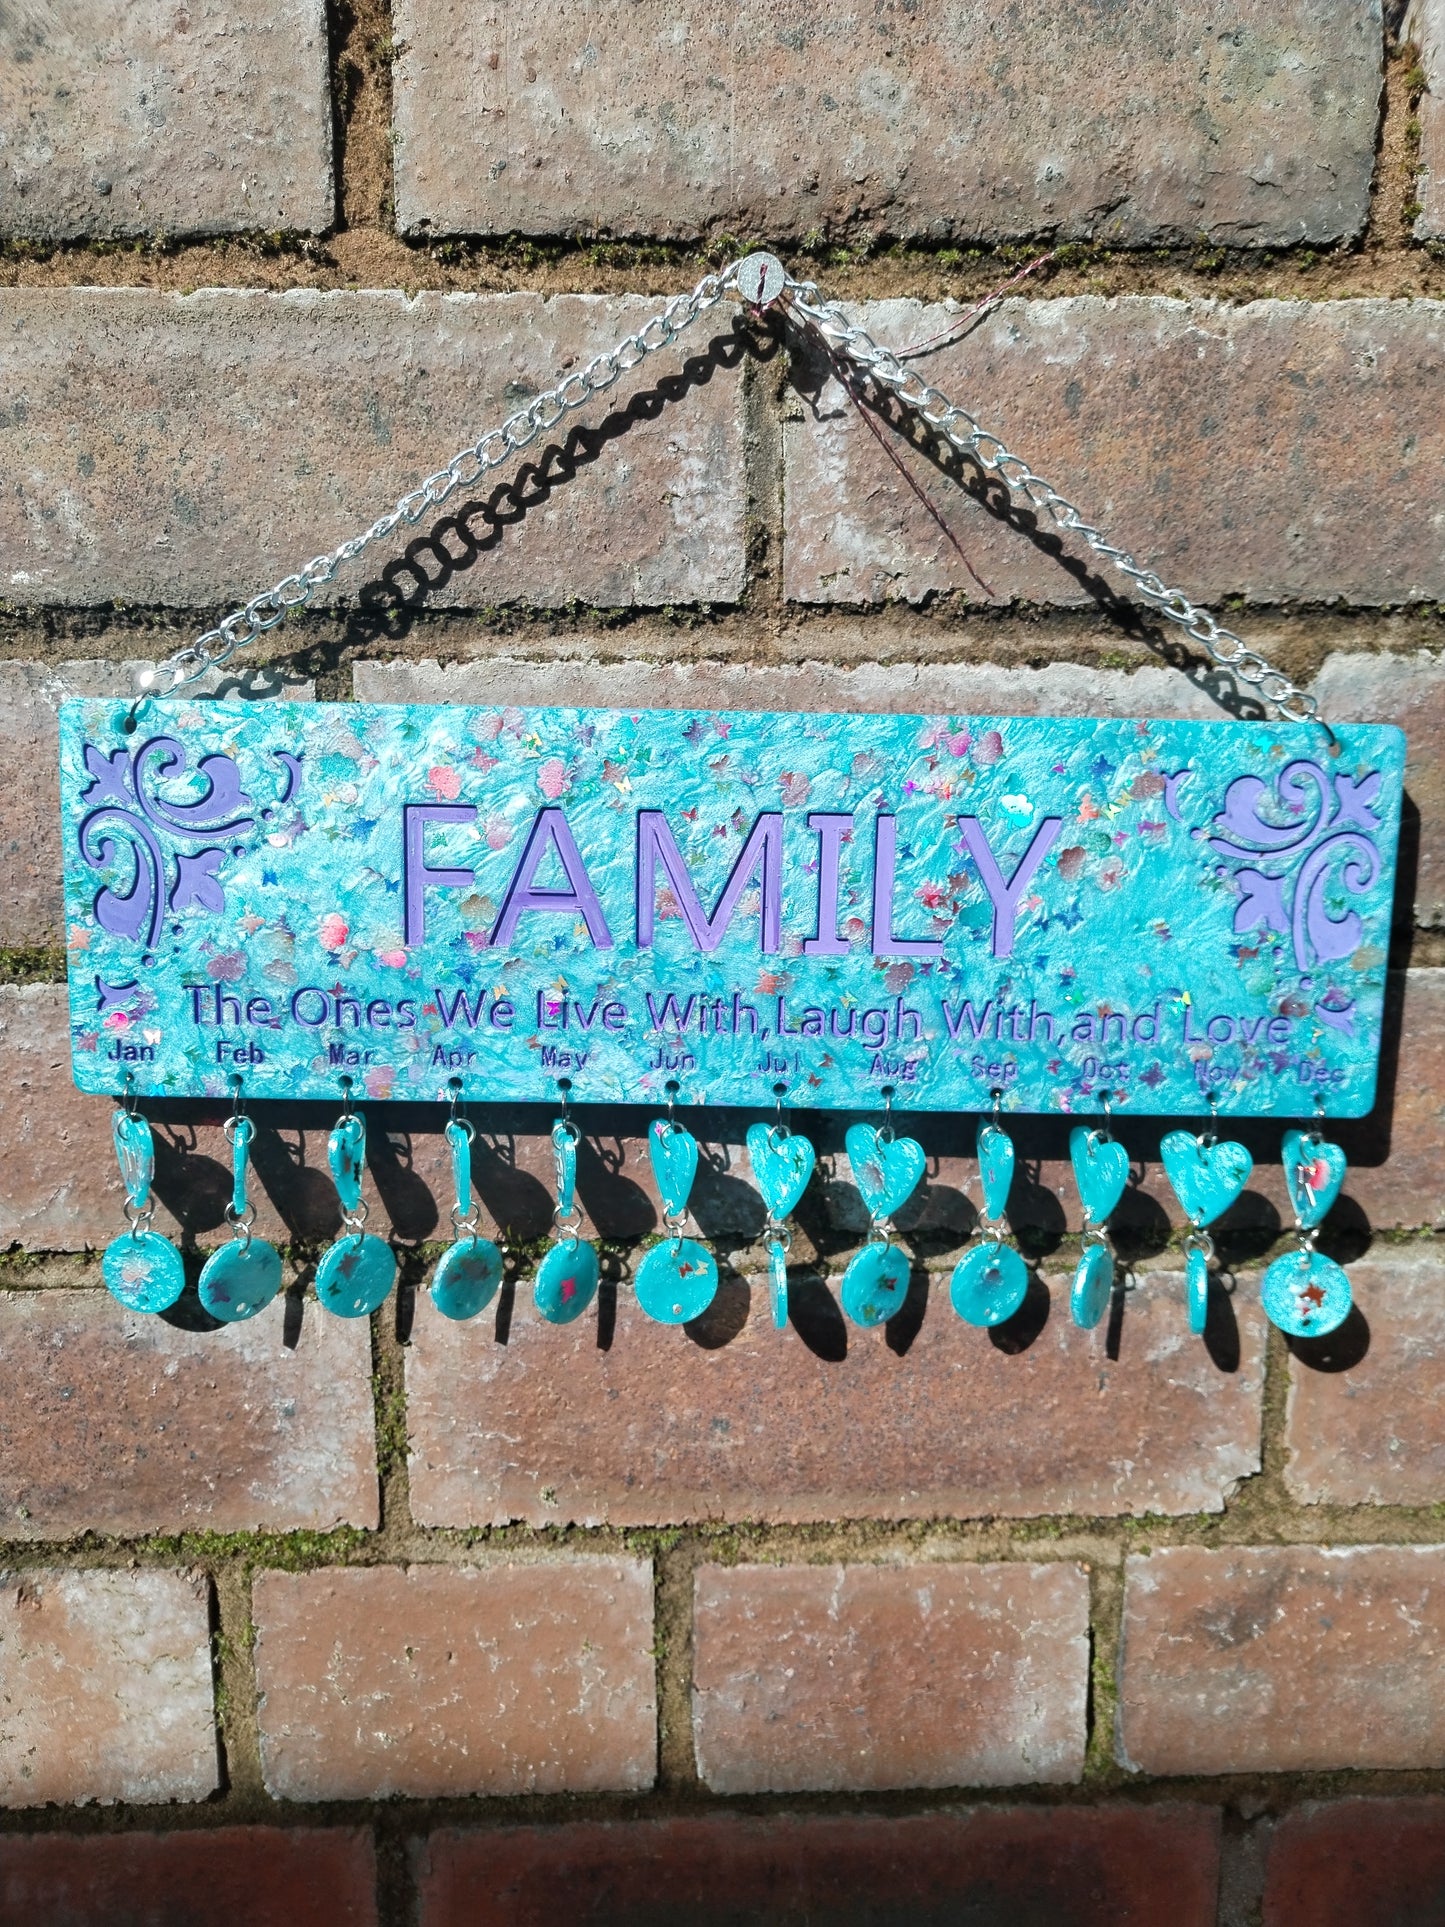 Family Hanging Plaque